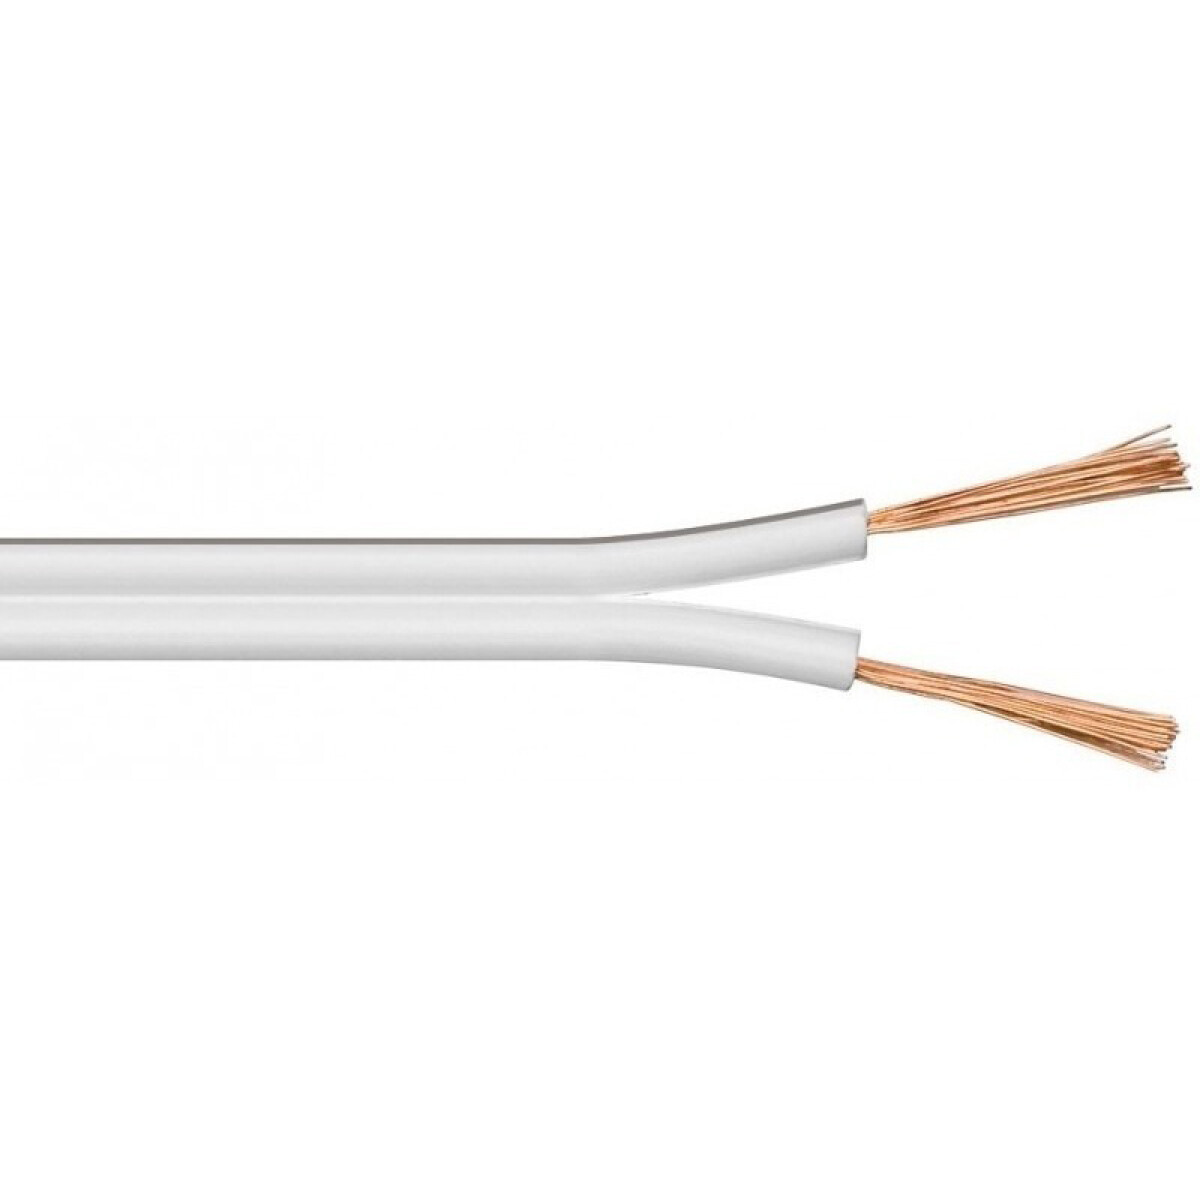 Cable gemelo blanco 2x1mm² - Rollo 100 mts. - C95908 